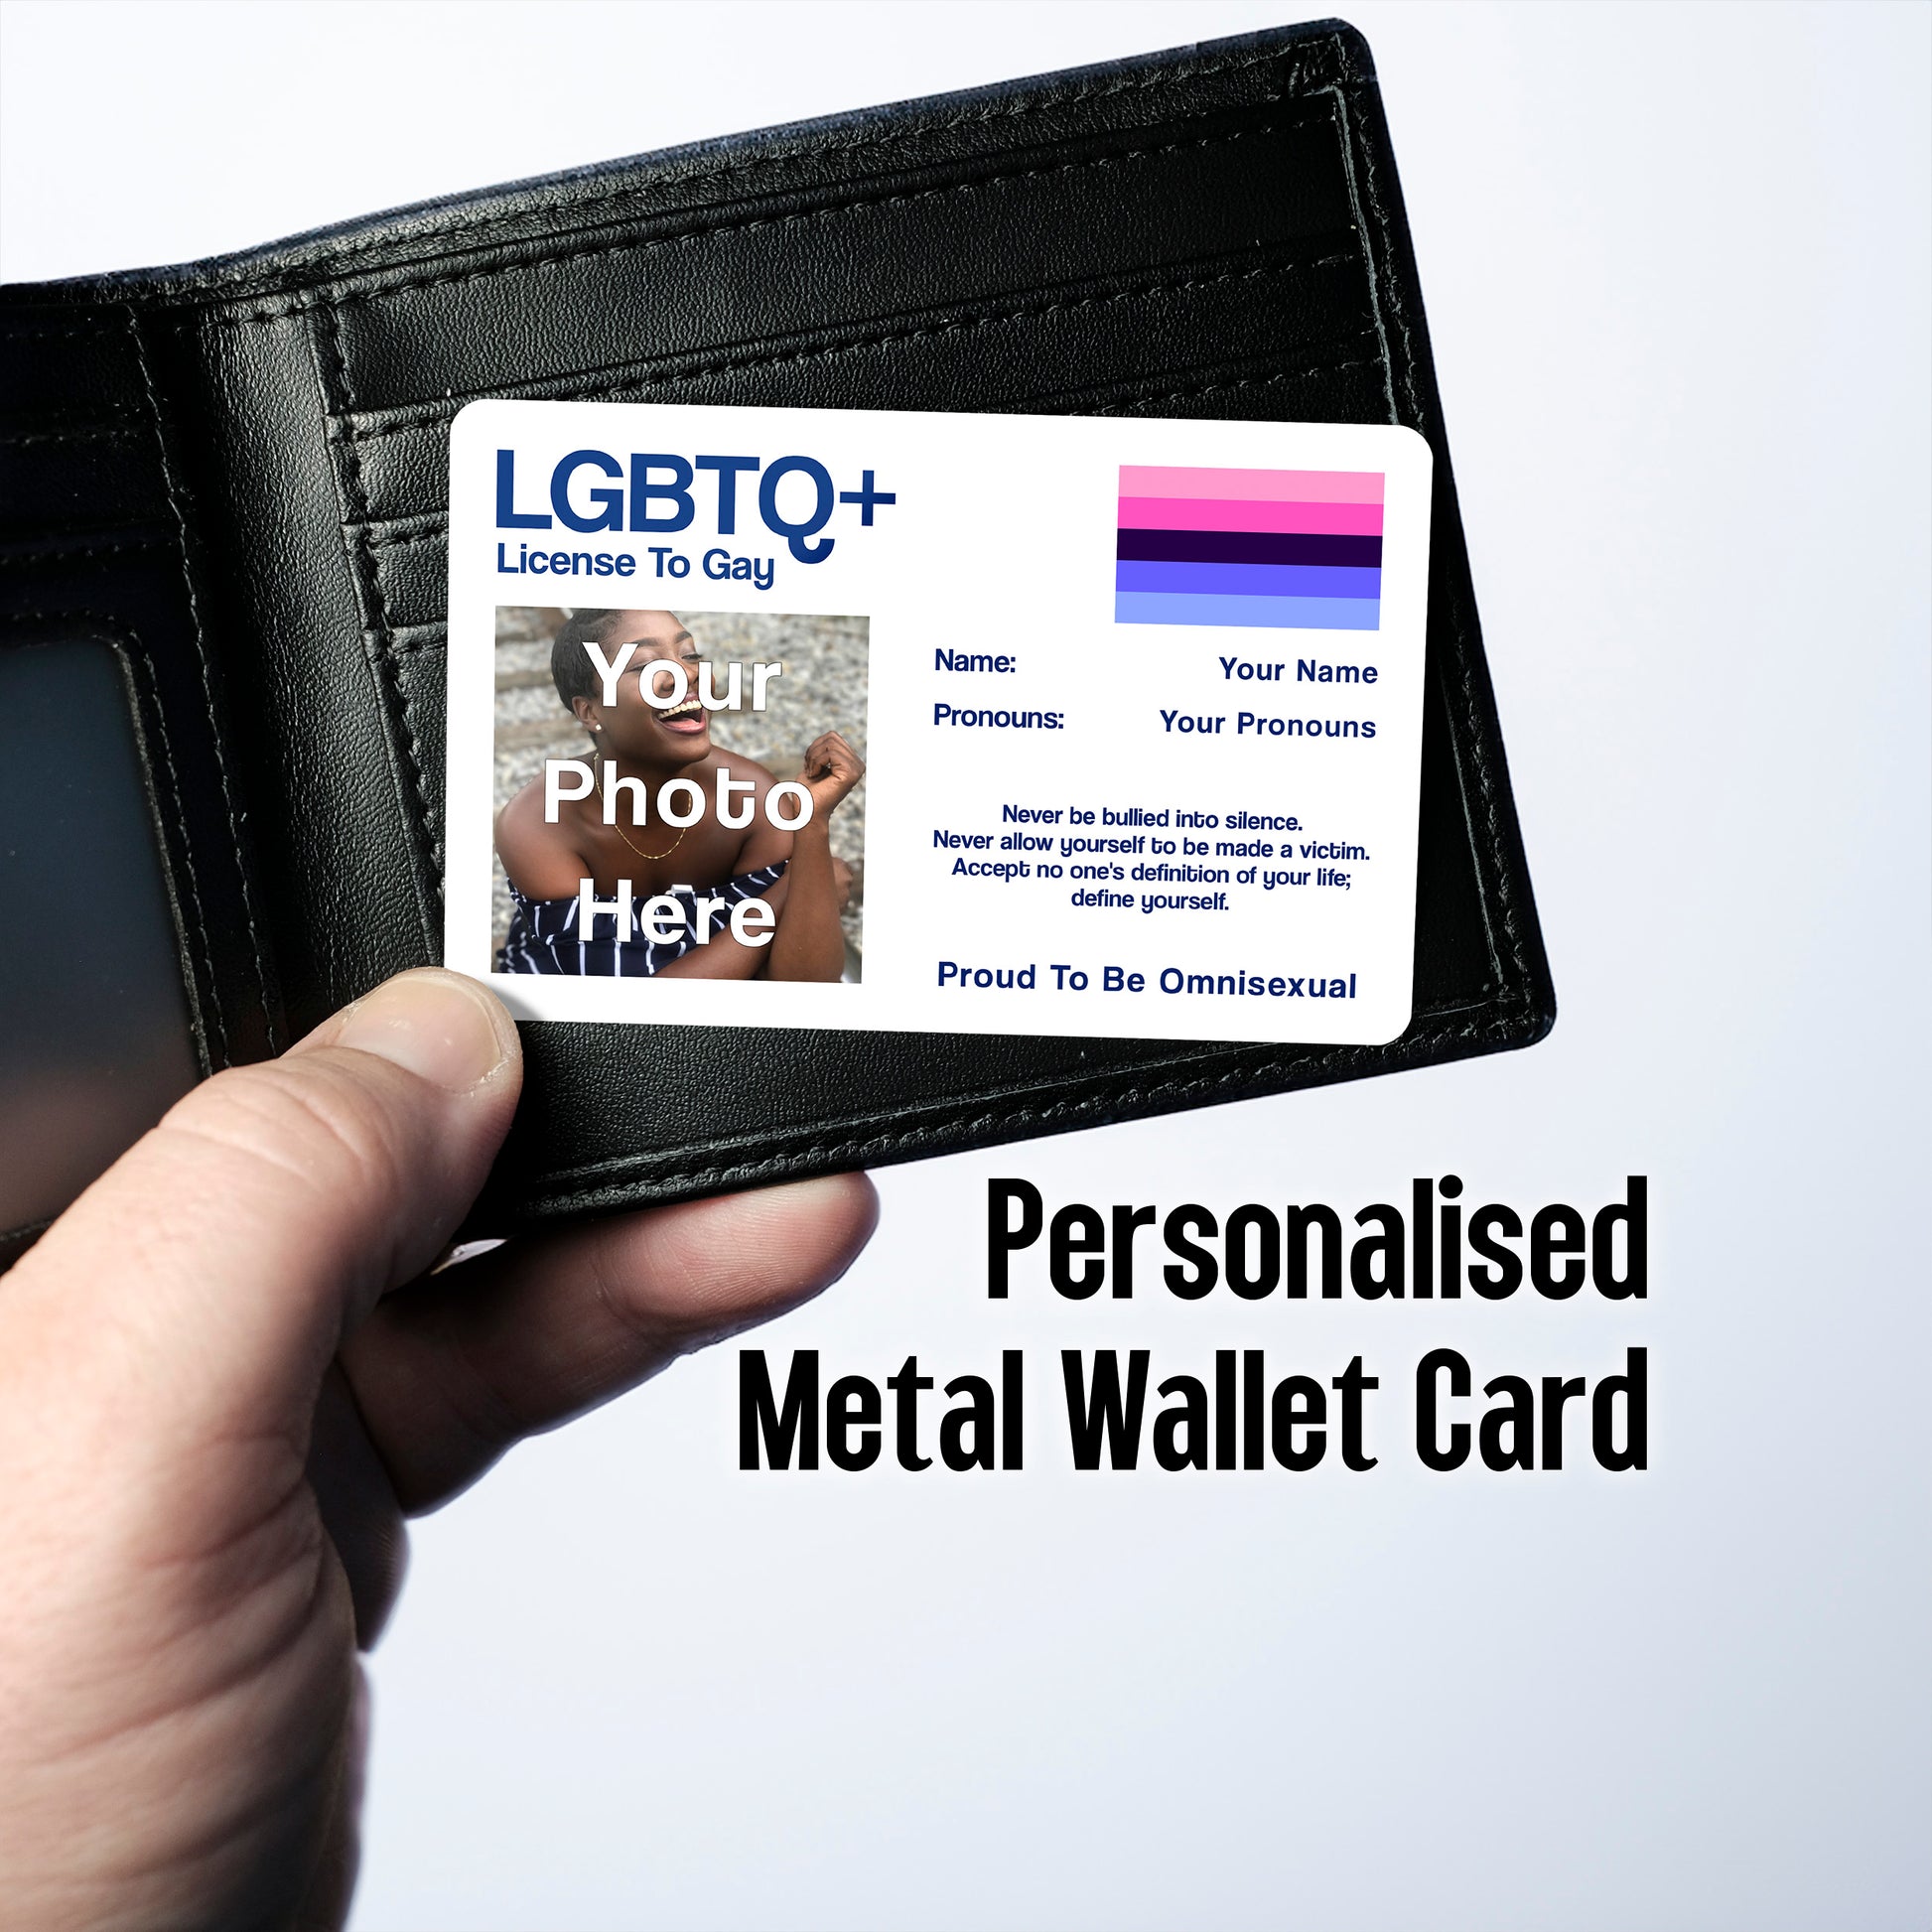 Omnisexual license to gay aluminium wallet card personalised with your name, pronouns, and photo